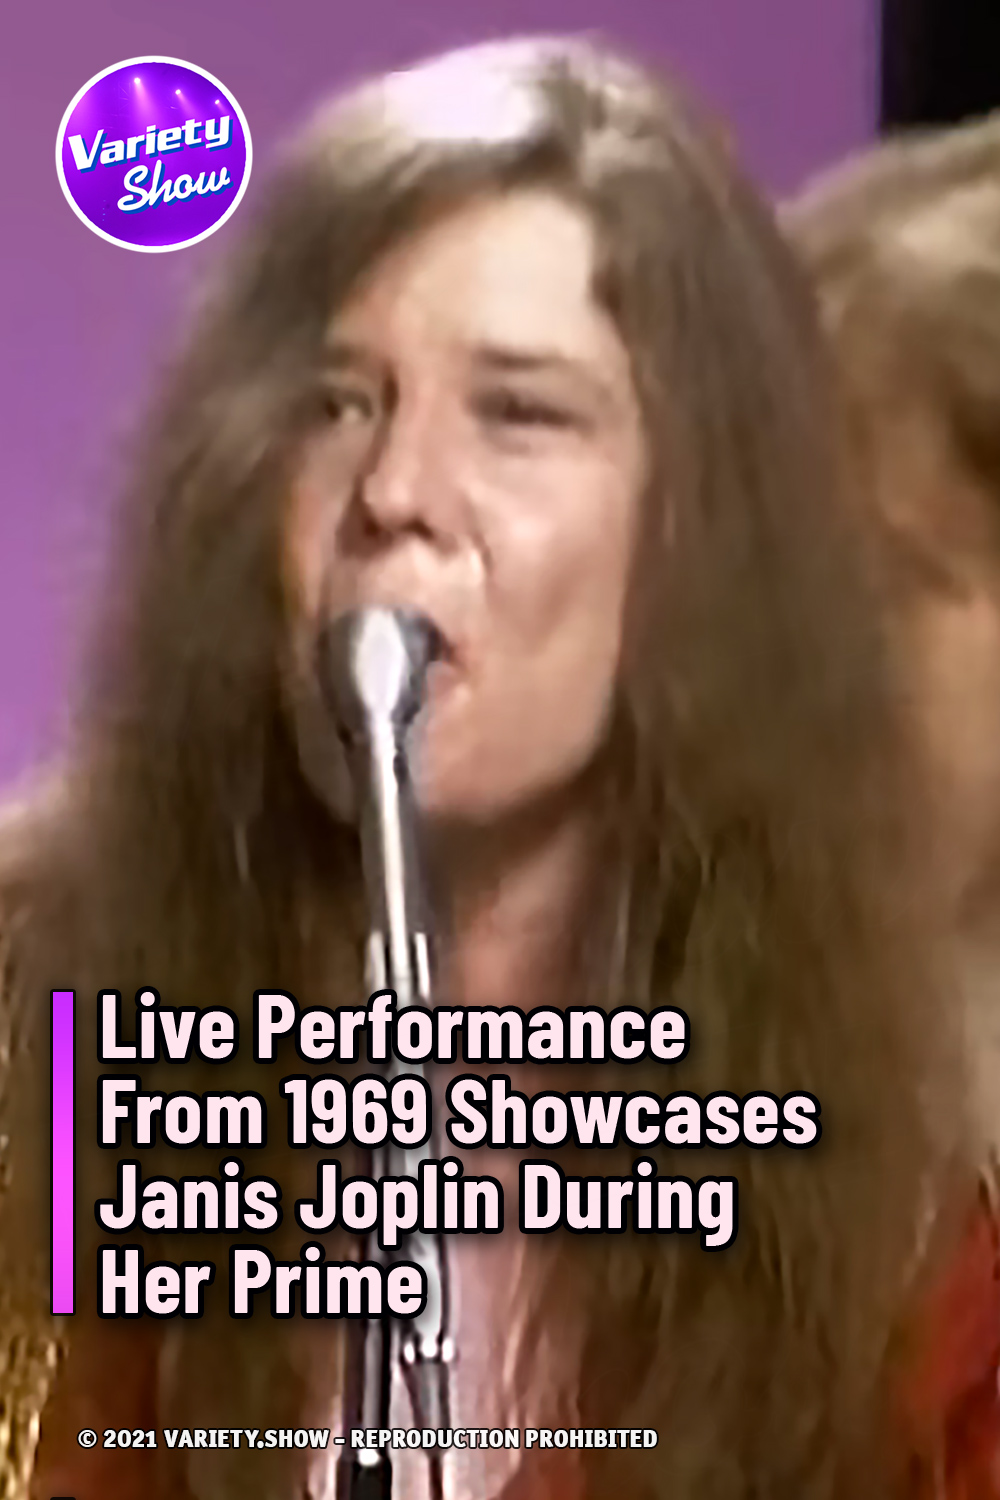 Live Performance From 1969 Showcases Janis Joplin During Her Prime